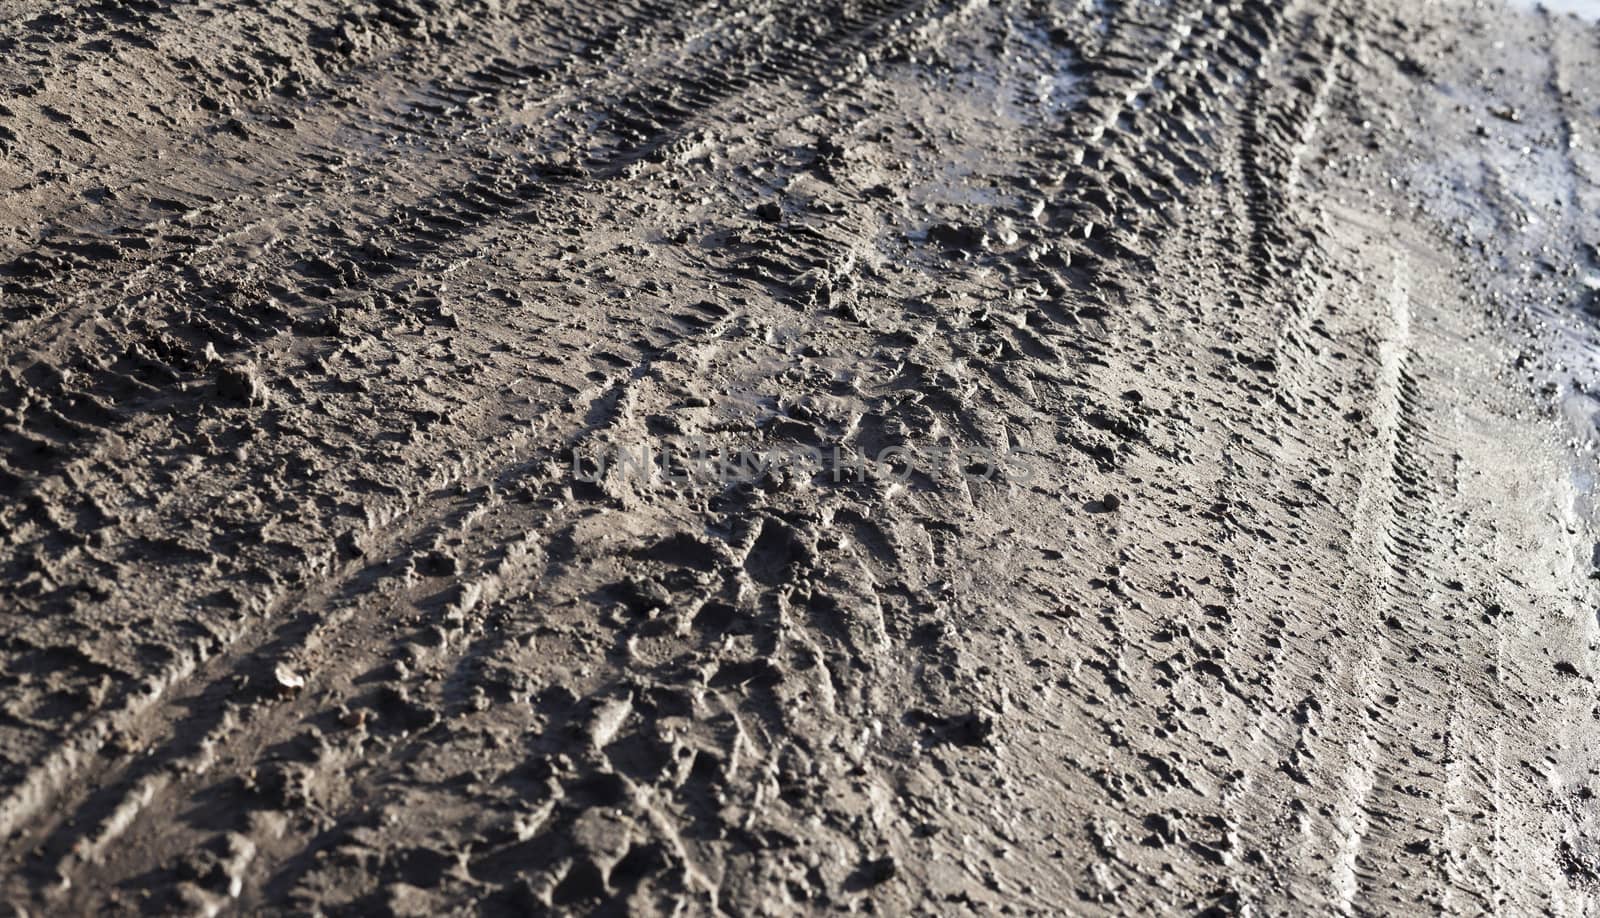 Wheel tracks on the dirt road by rootstocks